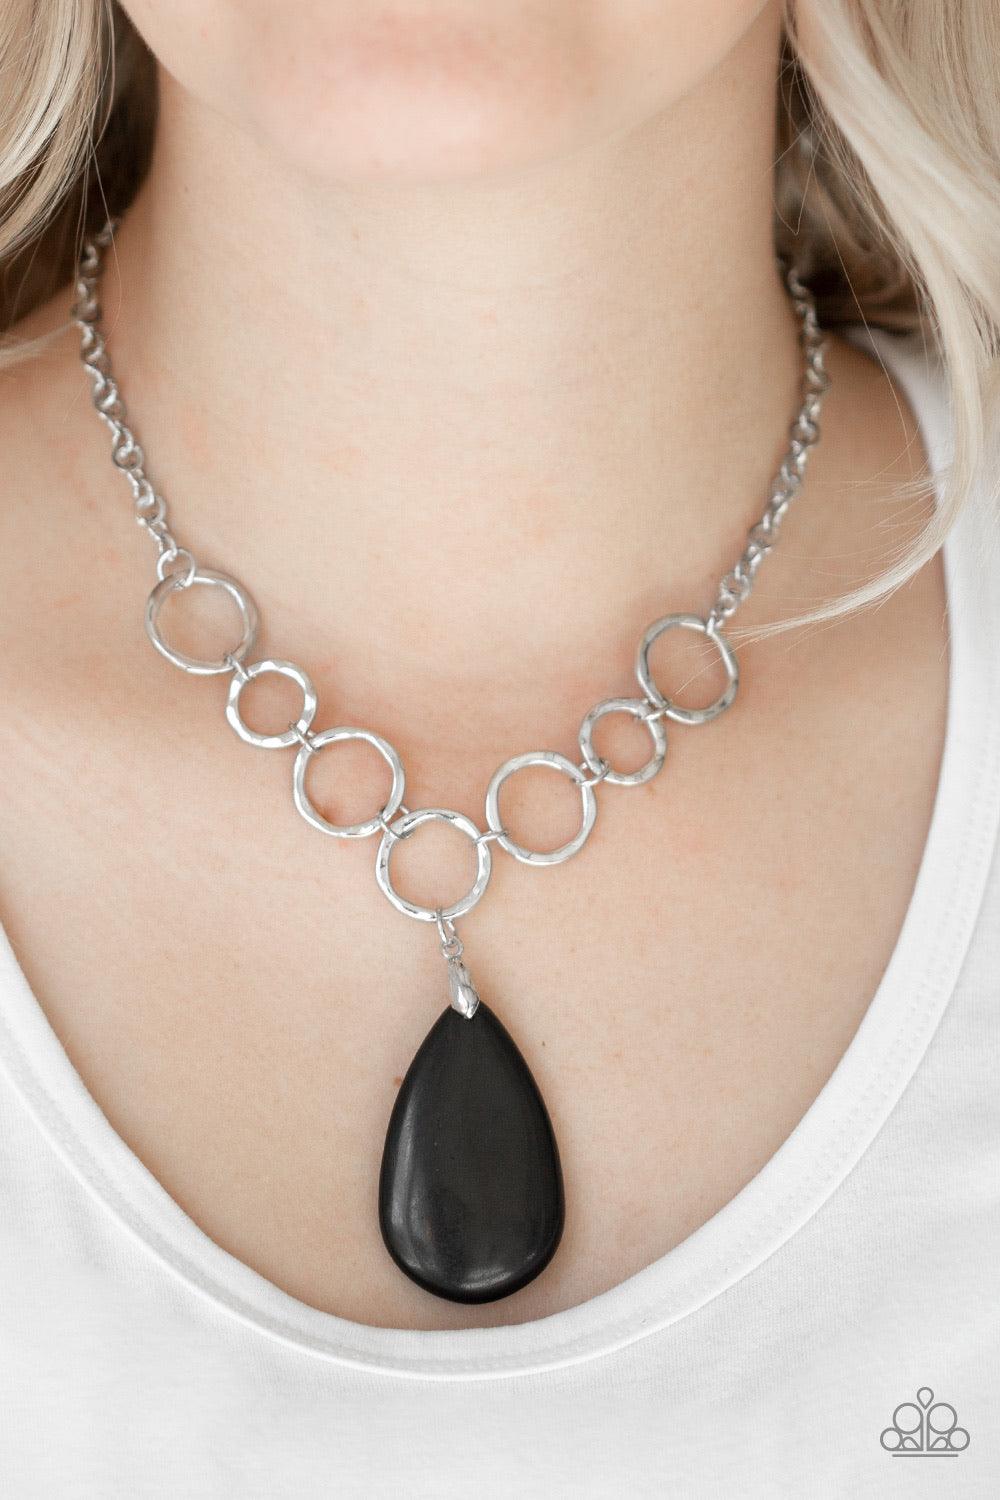 Paparazzi Accessories Livin On A Prairie - Black A collection of silver links give way to an earthy black stone teardrop, creating a tranquil pendant below the collar. Each silver ring is hammered in texture, adding an artisanal touch to the piece. Featur